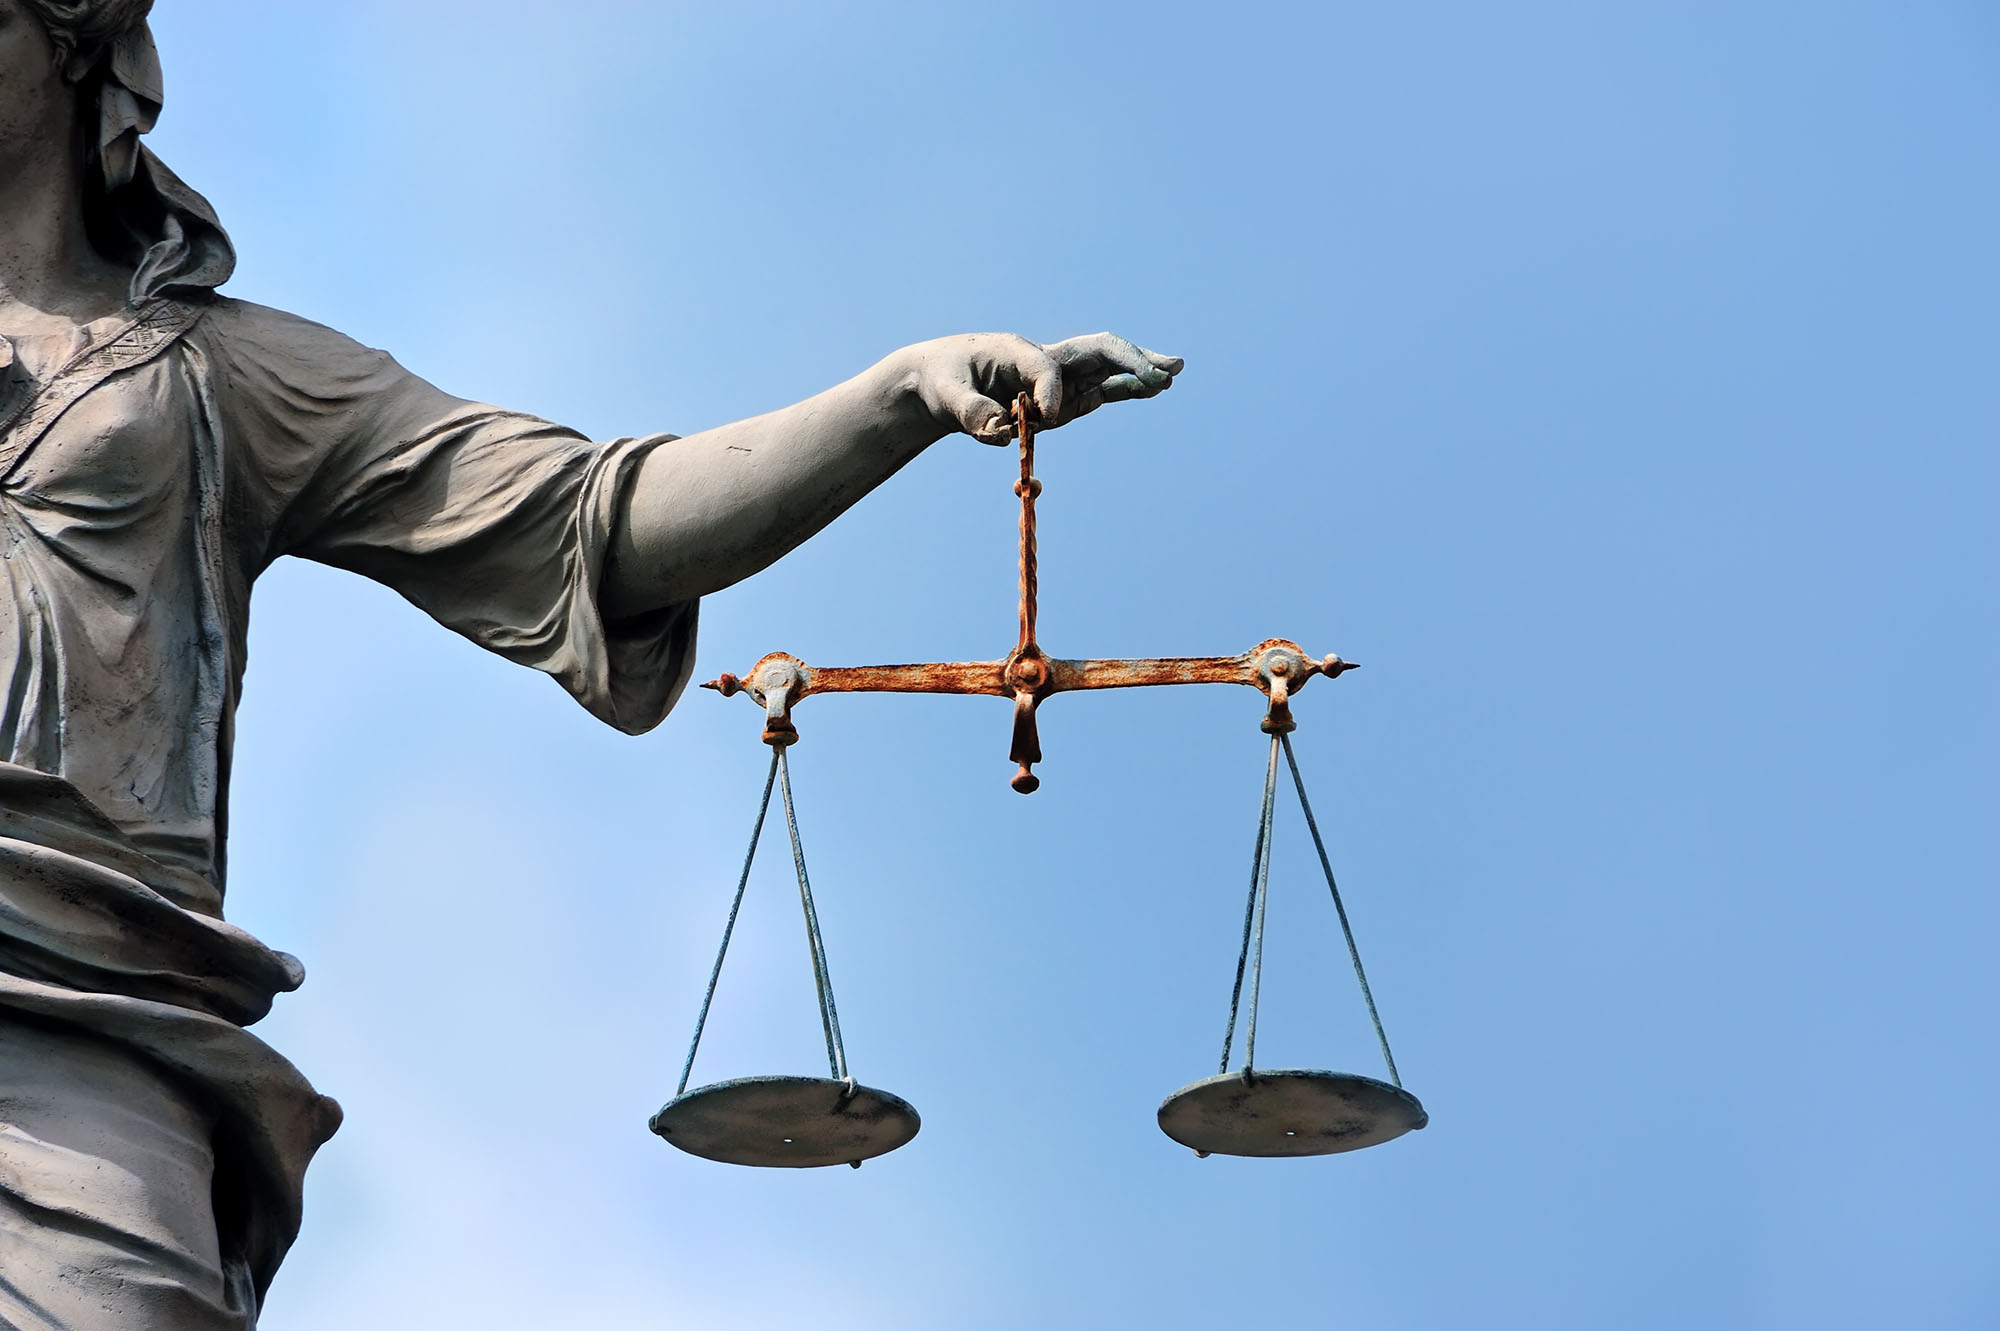 PHOTO: The scales of justice are held by a statue in an undated stock image.